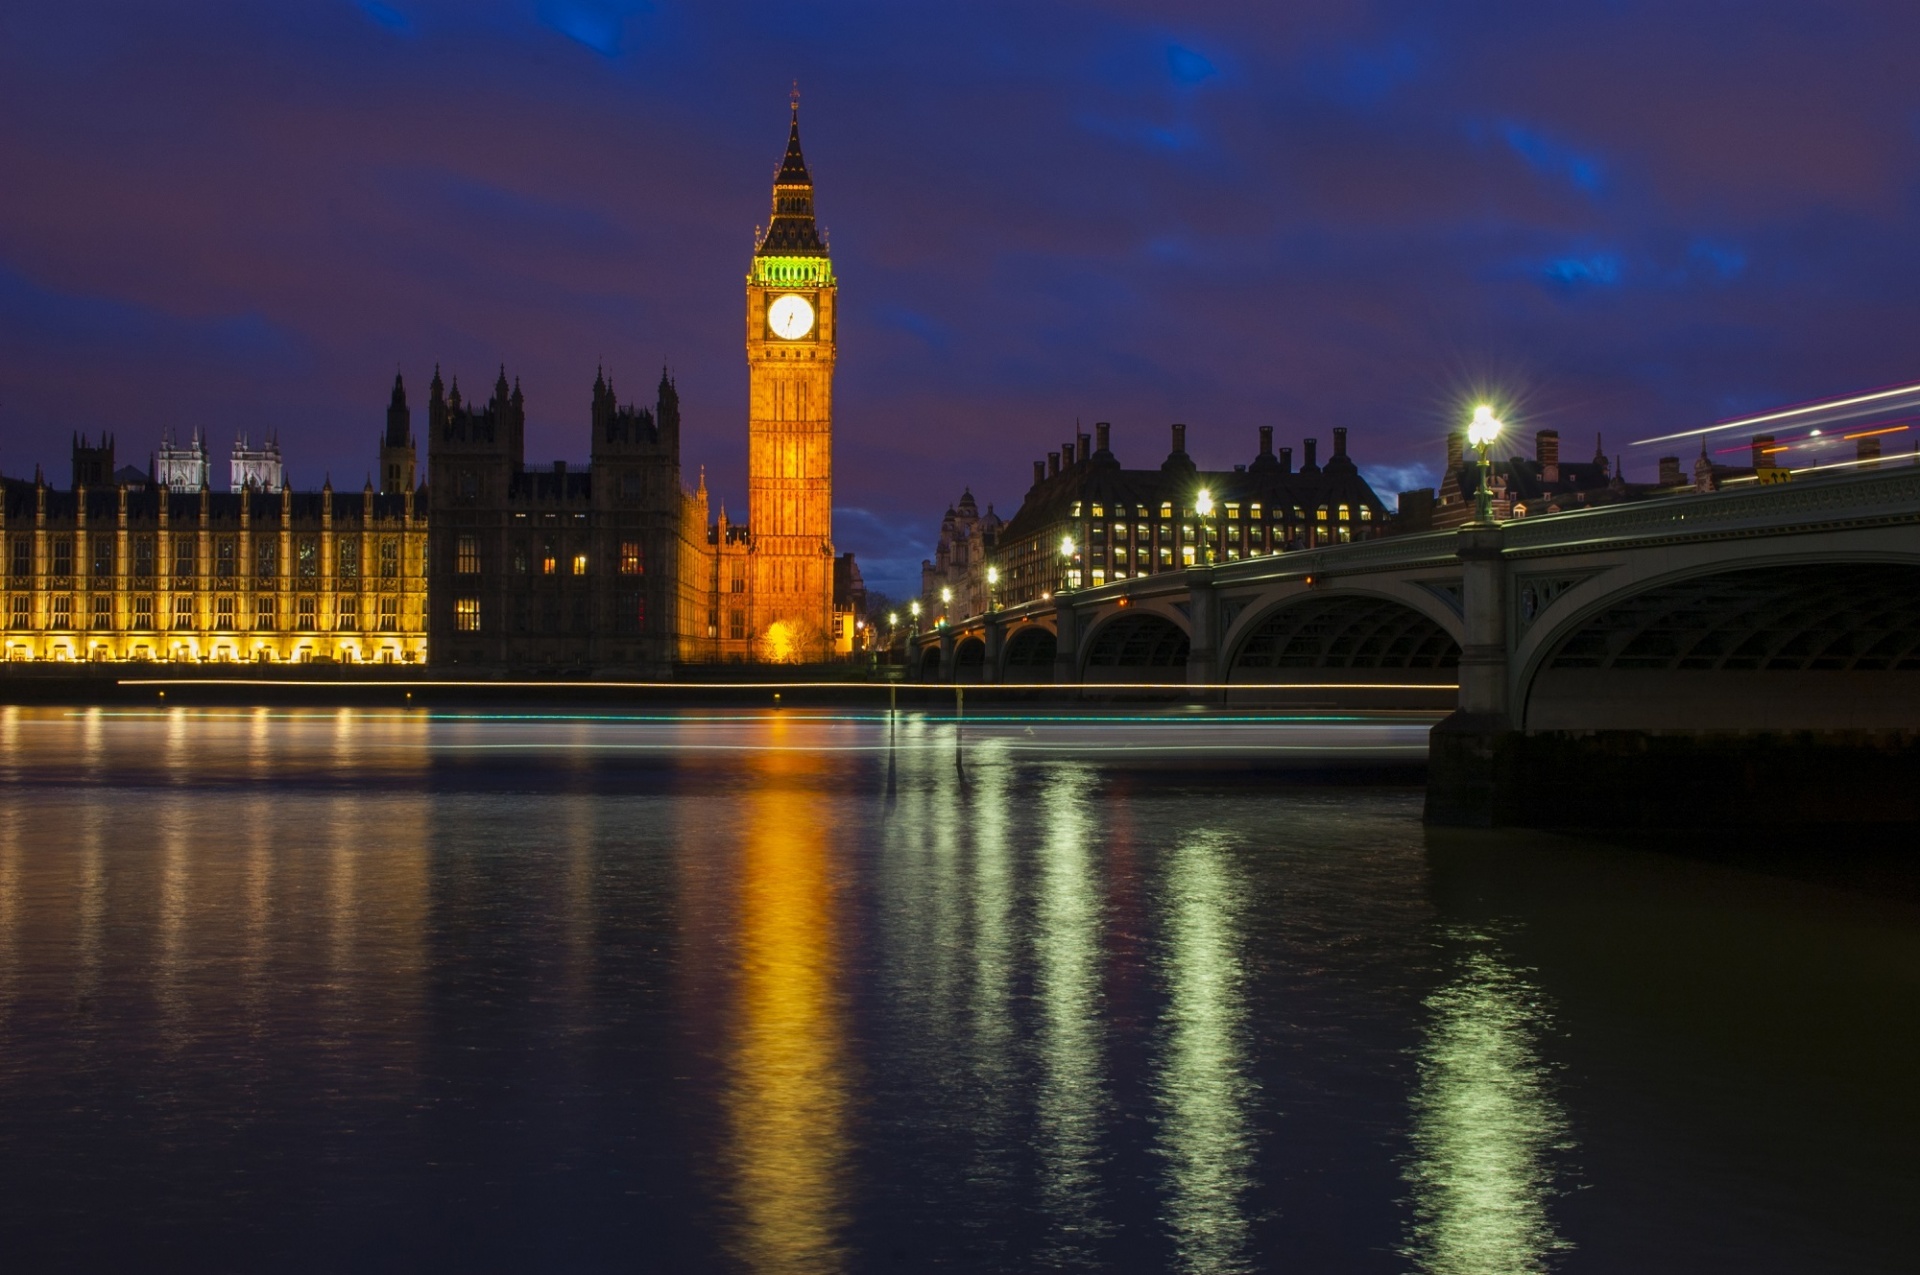 Night view of Big Ben and the Thames River in London, England